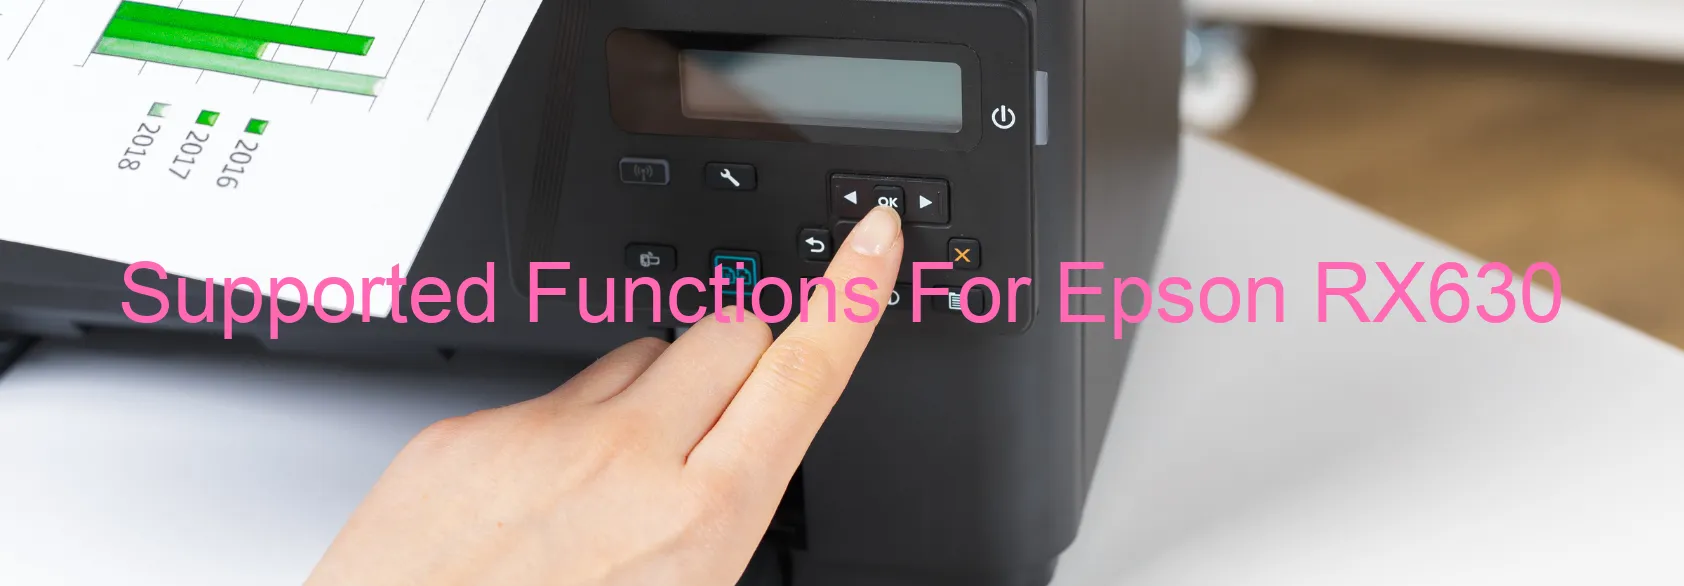 supported-functions-for-epson-rx630.webp